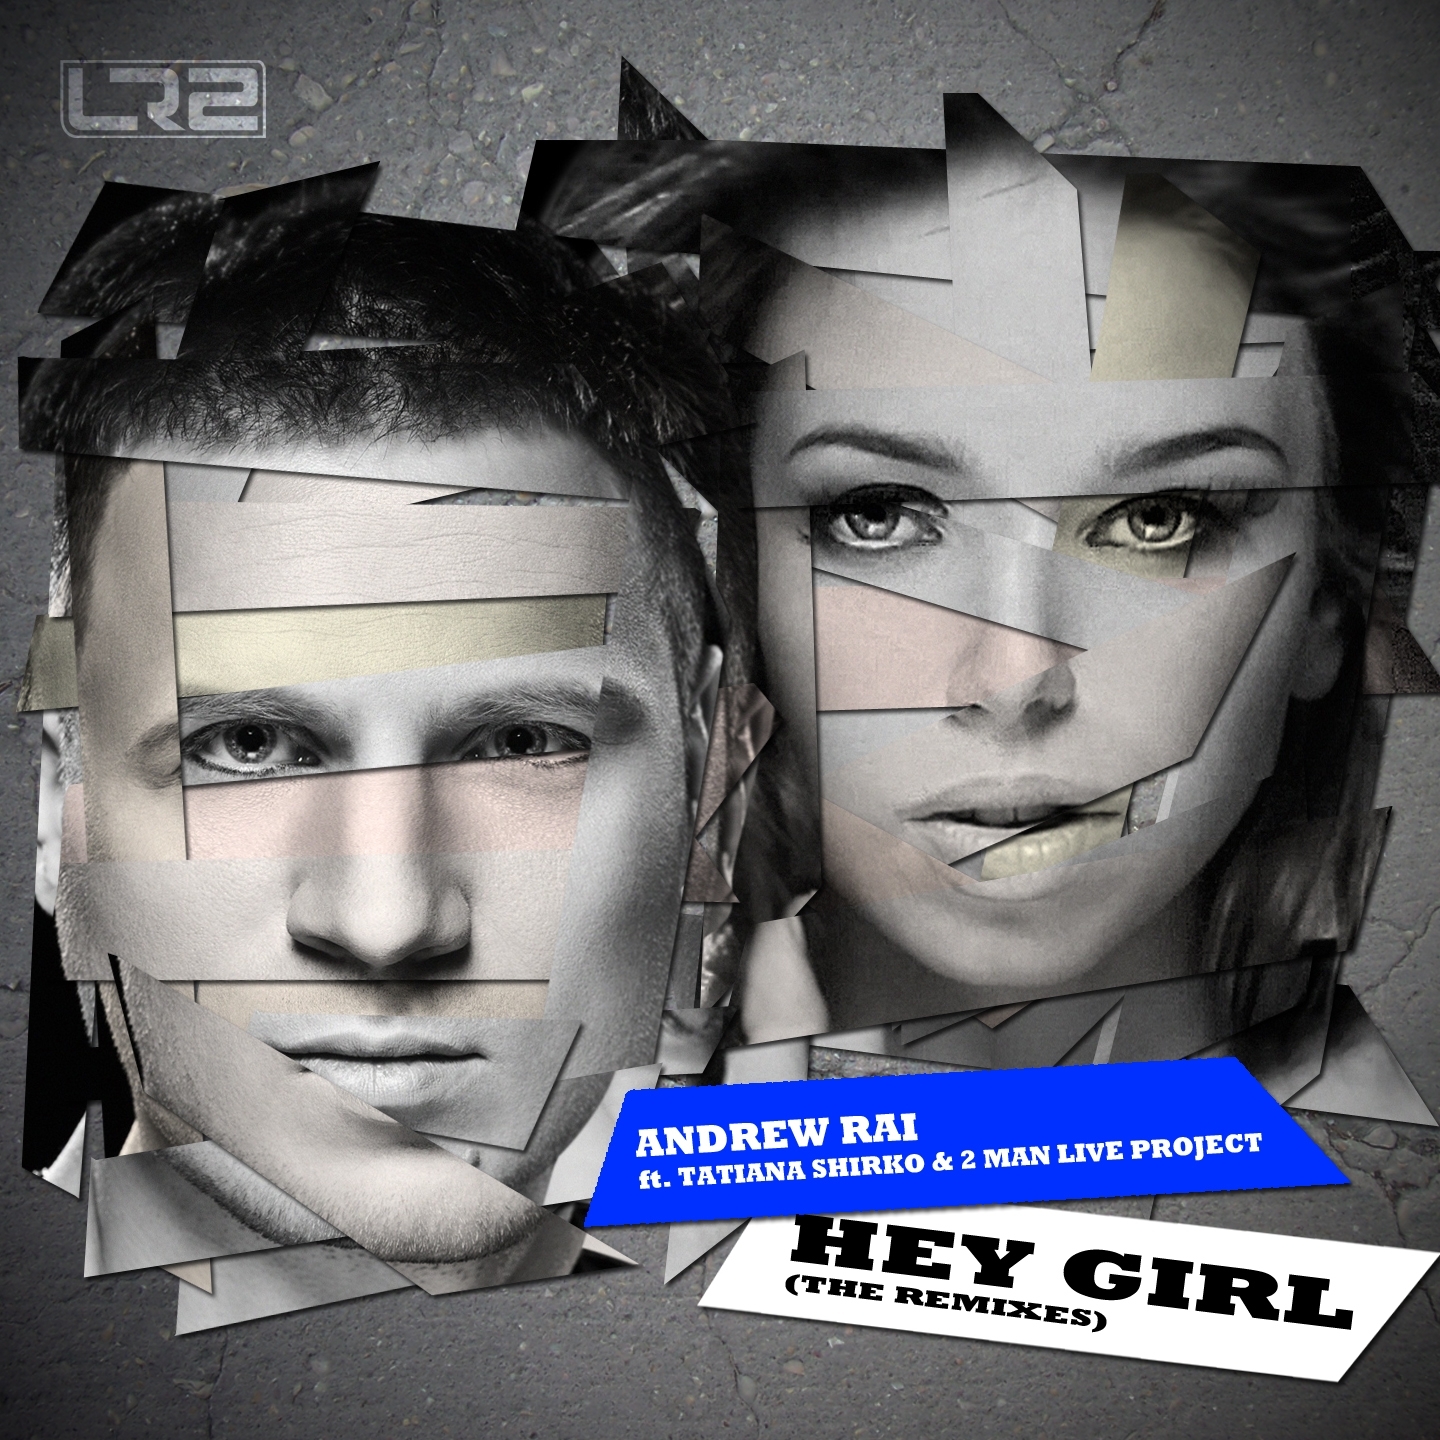 Hey Girl (Buy One Get One Free Remix)